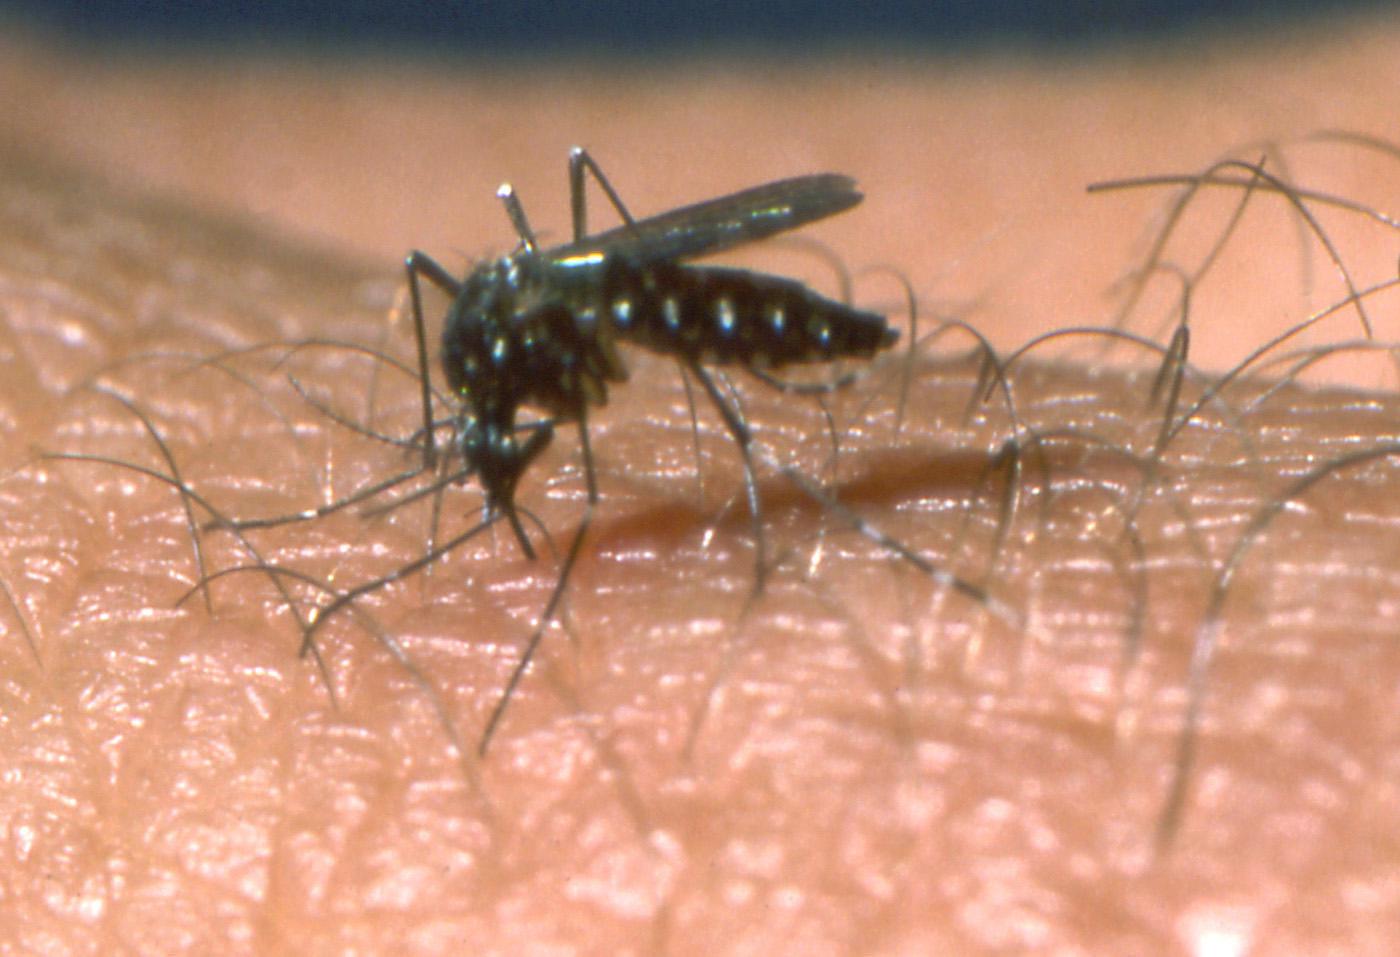 Mosquitoes can transmit several diseases -- including West Nile Virus -- and everyone should take precautions to avoid bites when outdoors, especially at dawn and dusk when mosquitoes are most active.